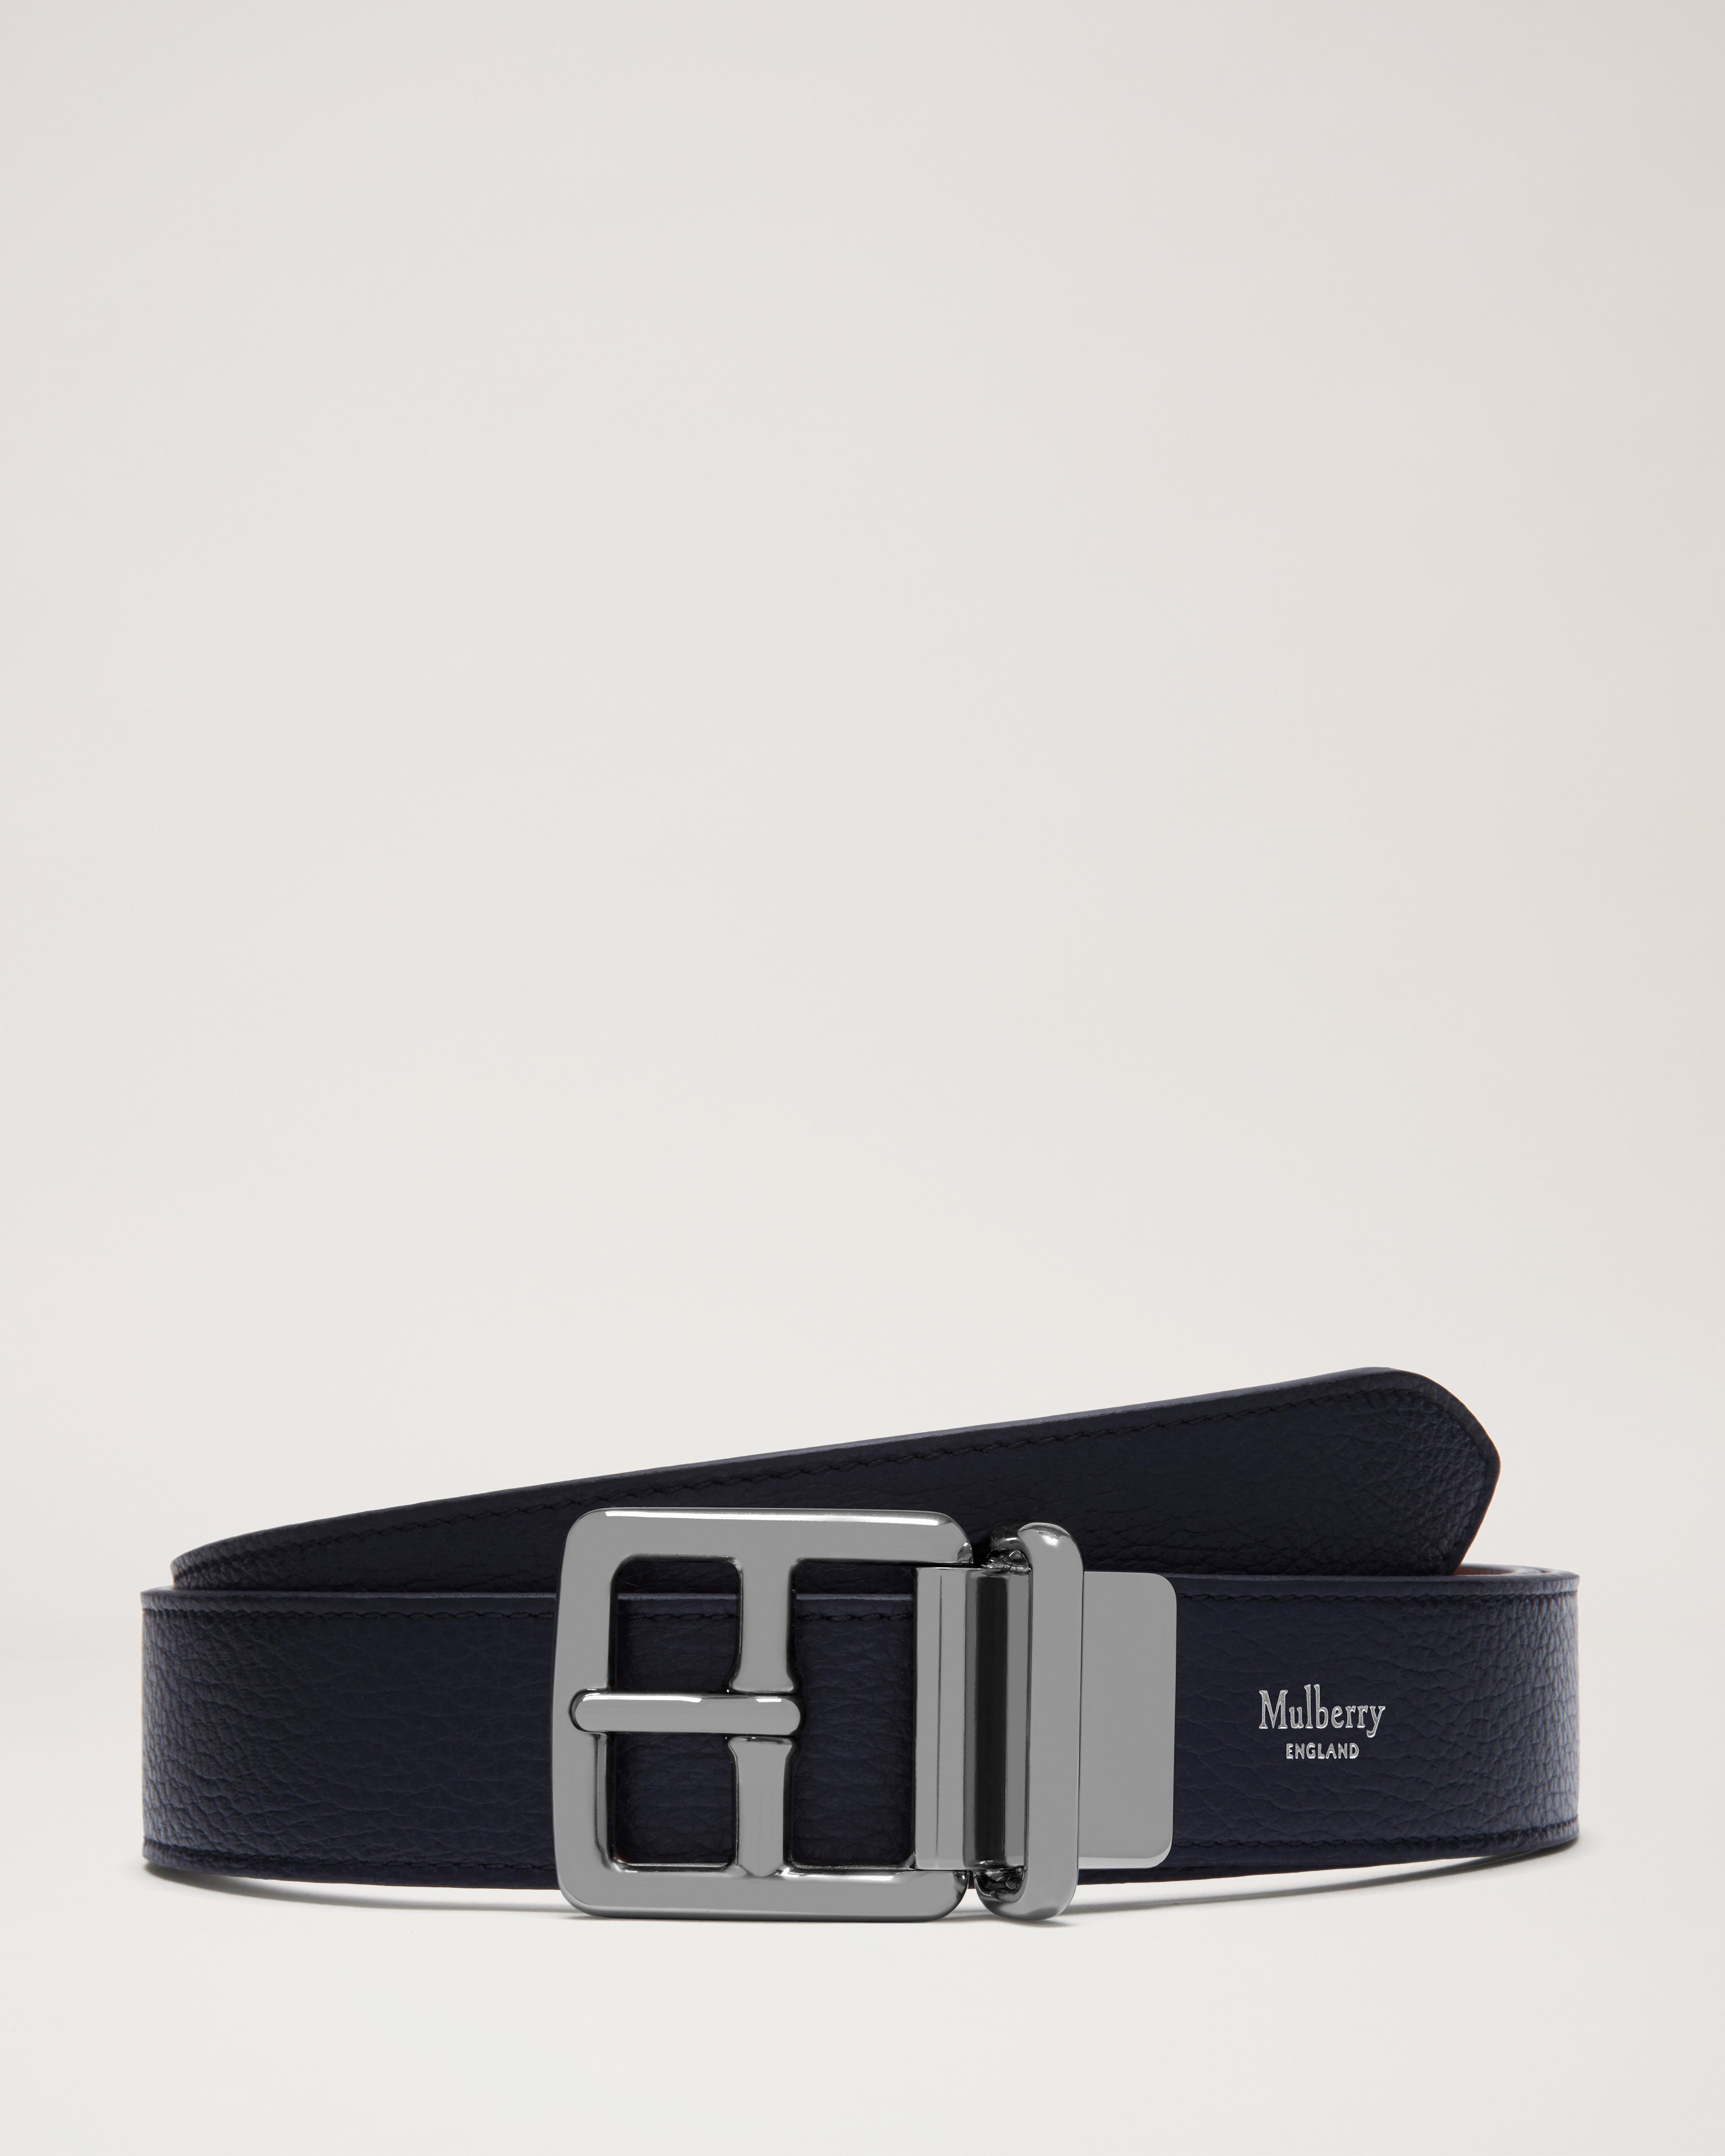 Leather Belt With a Textured Buckle in Black Color -  Hong Kong